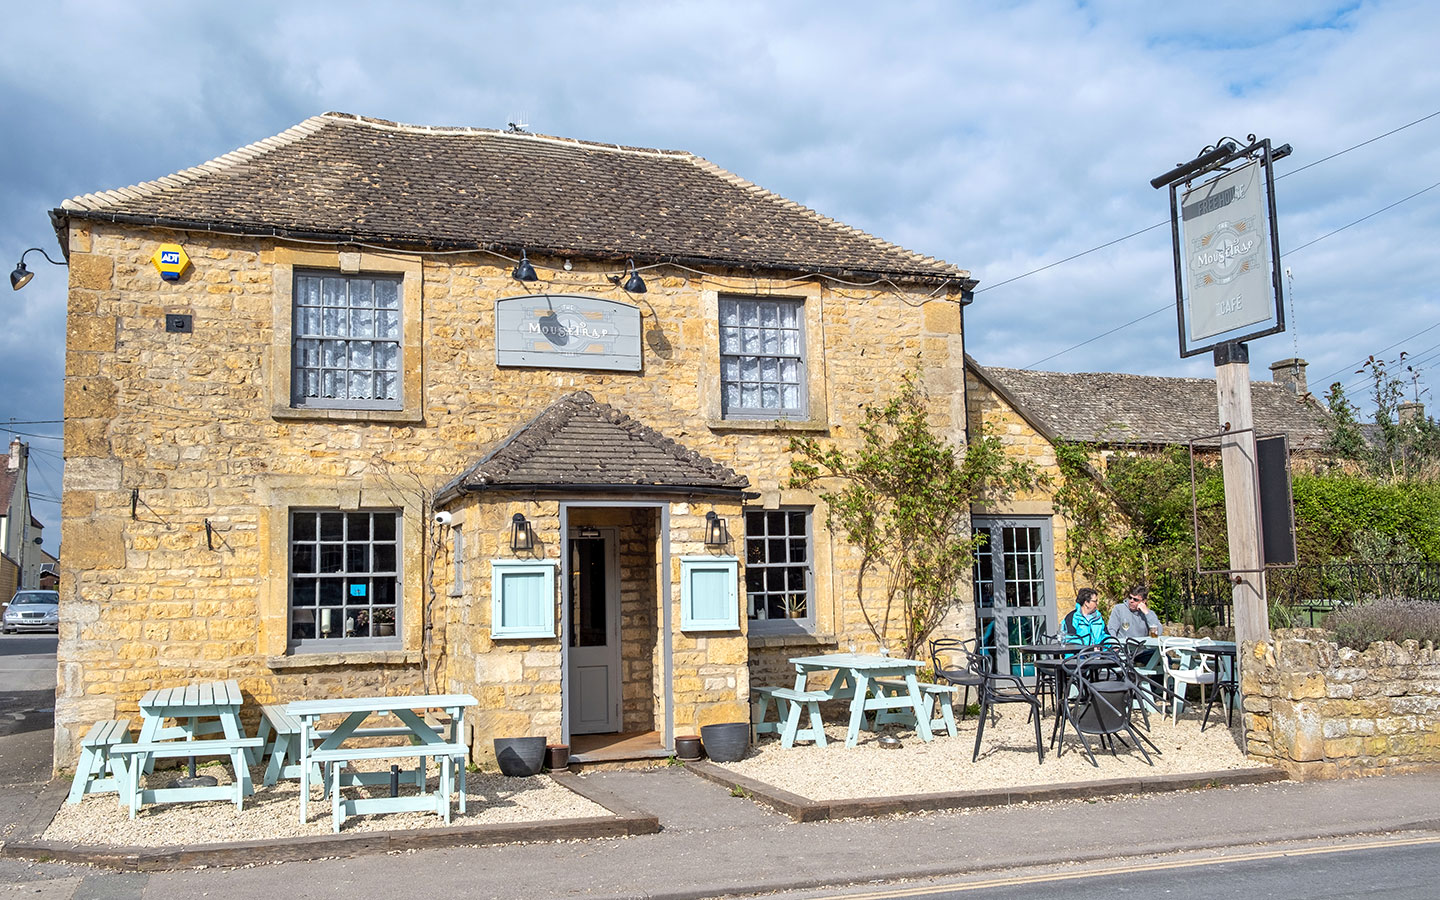 The Mousetrap Inn, one of the best pubs in Bourton-on-the-Water